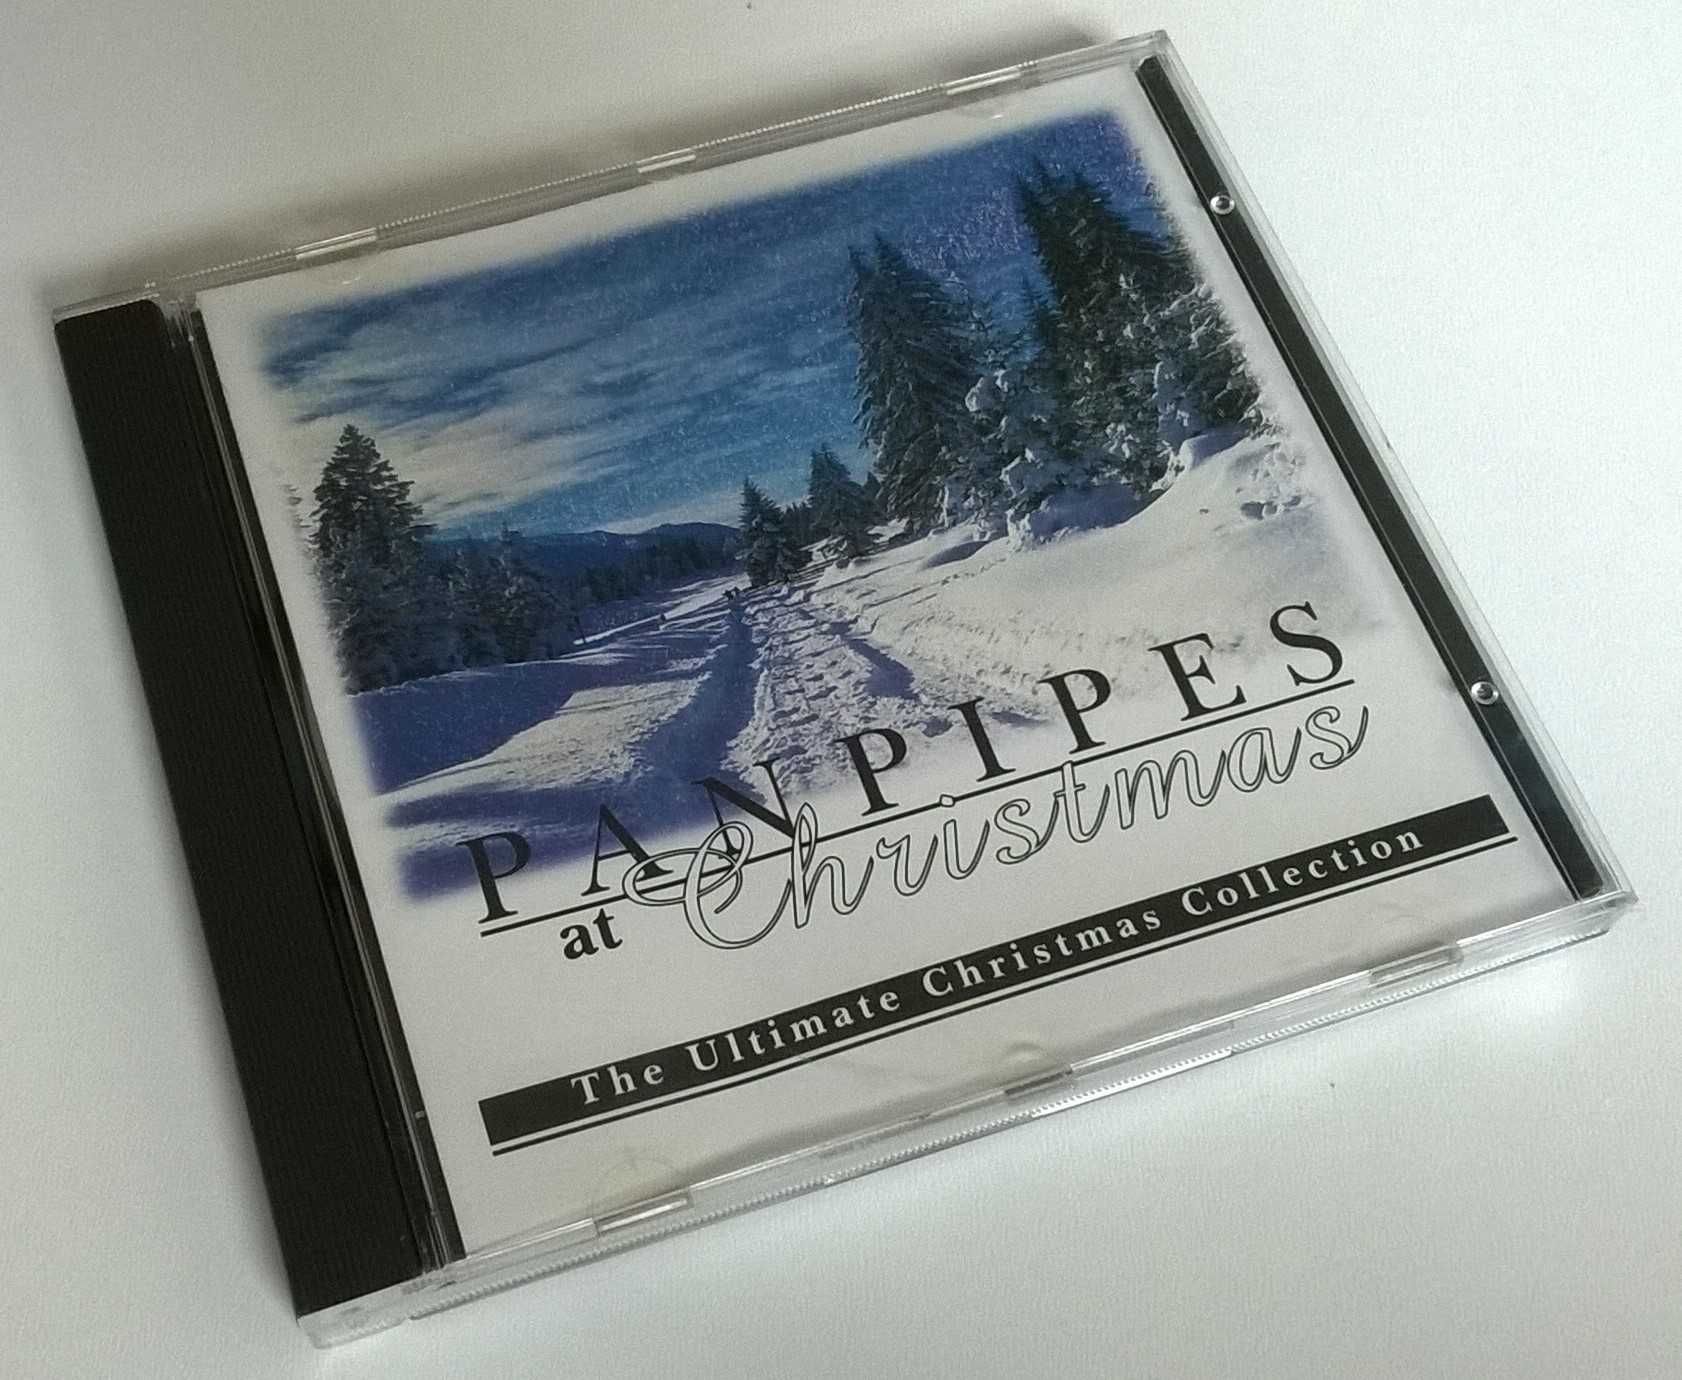 PANPIPES at CHRISTMAS The Ultimate Christmas Collection 1 CD